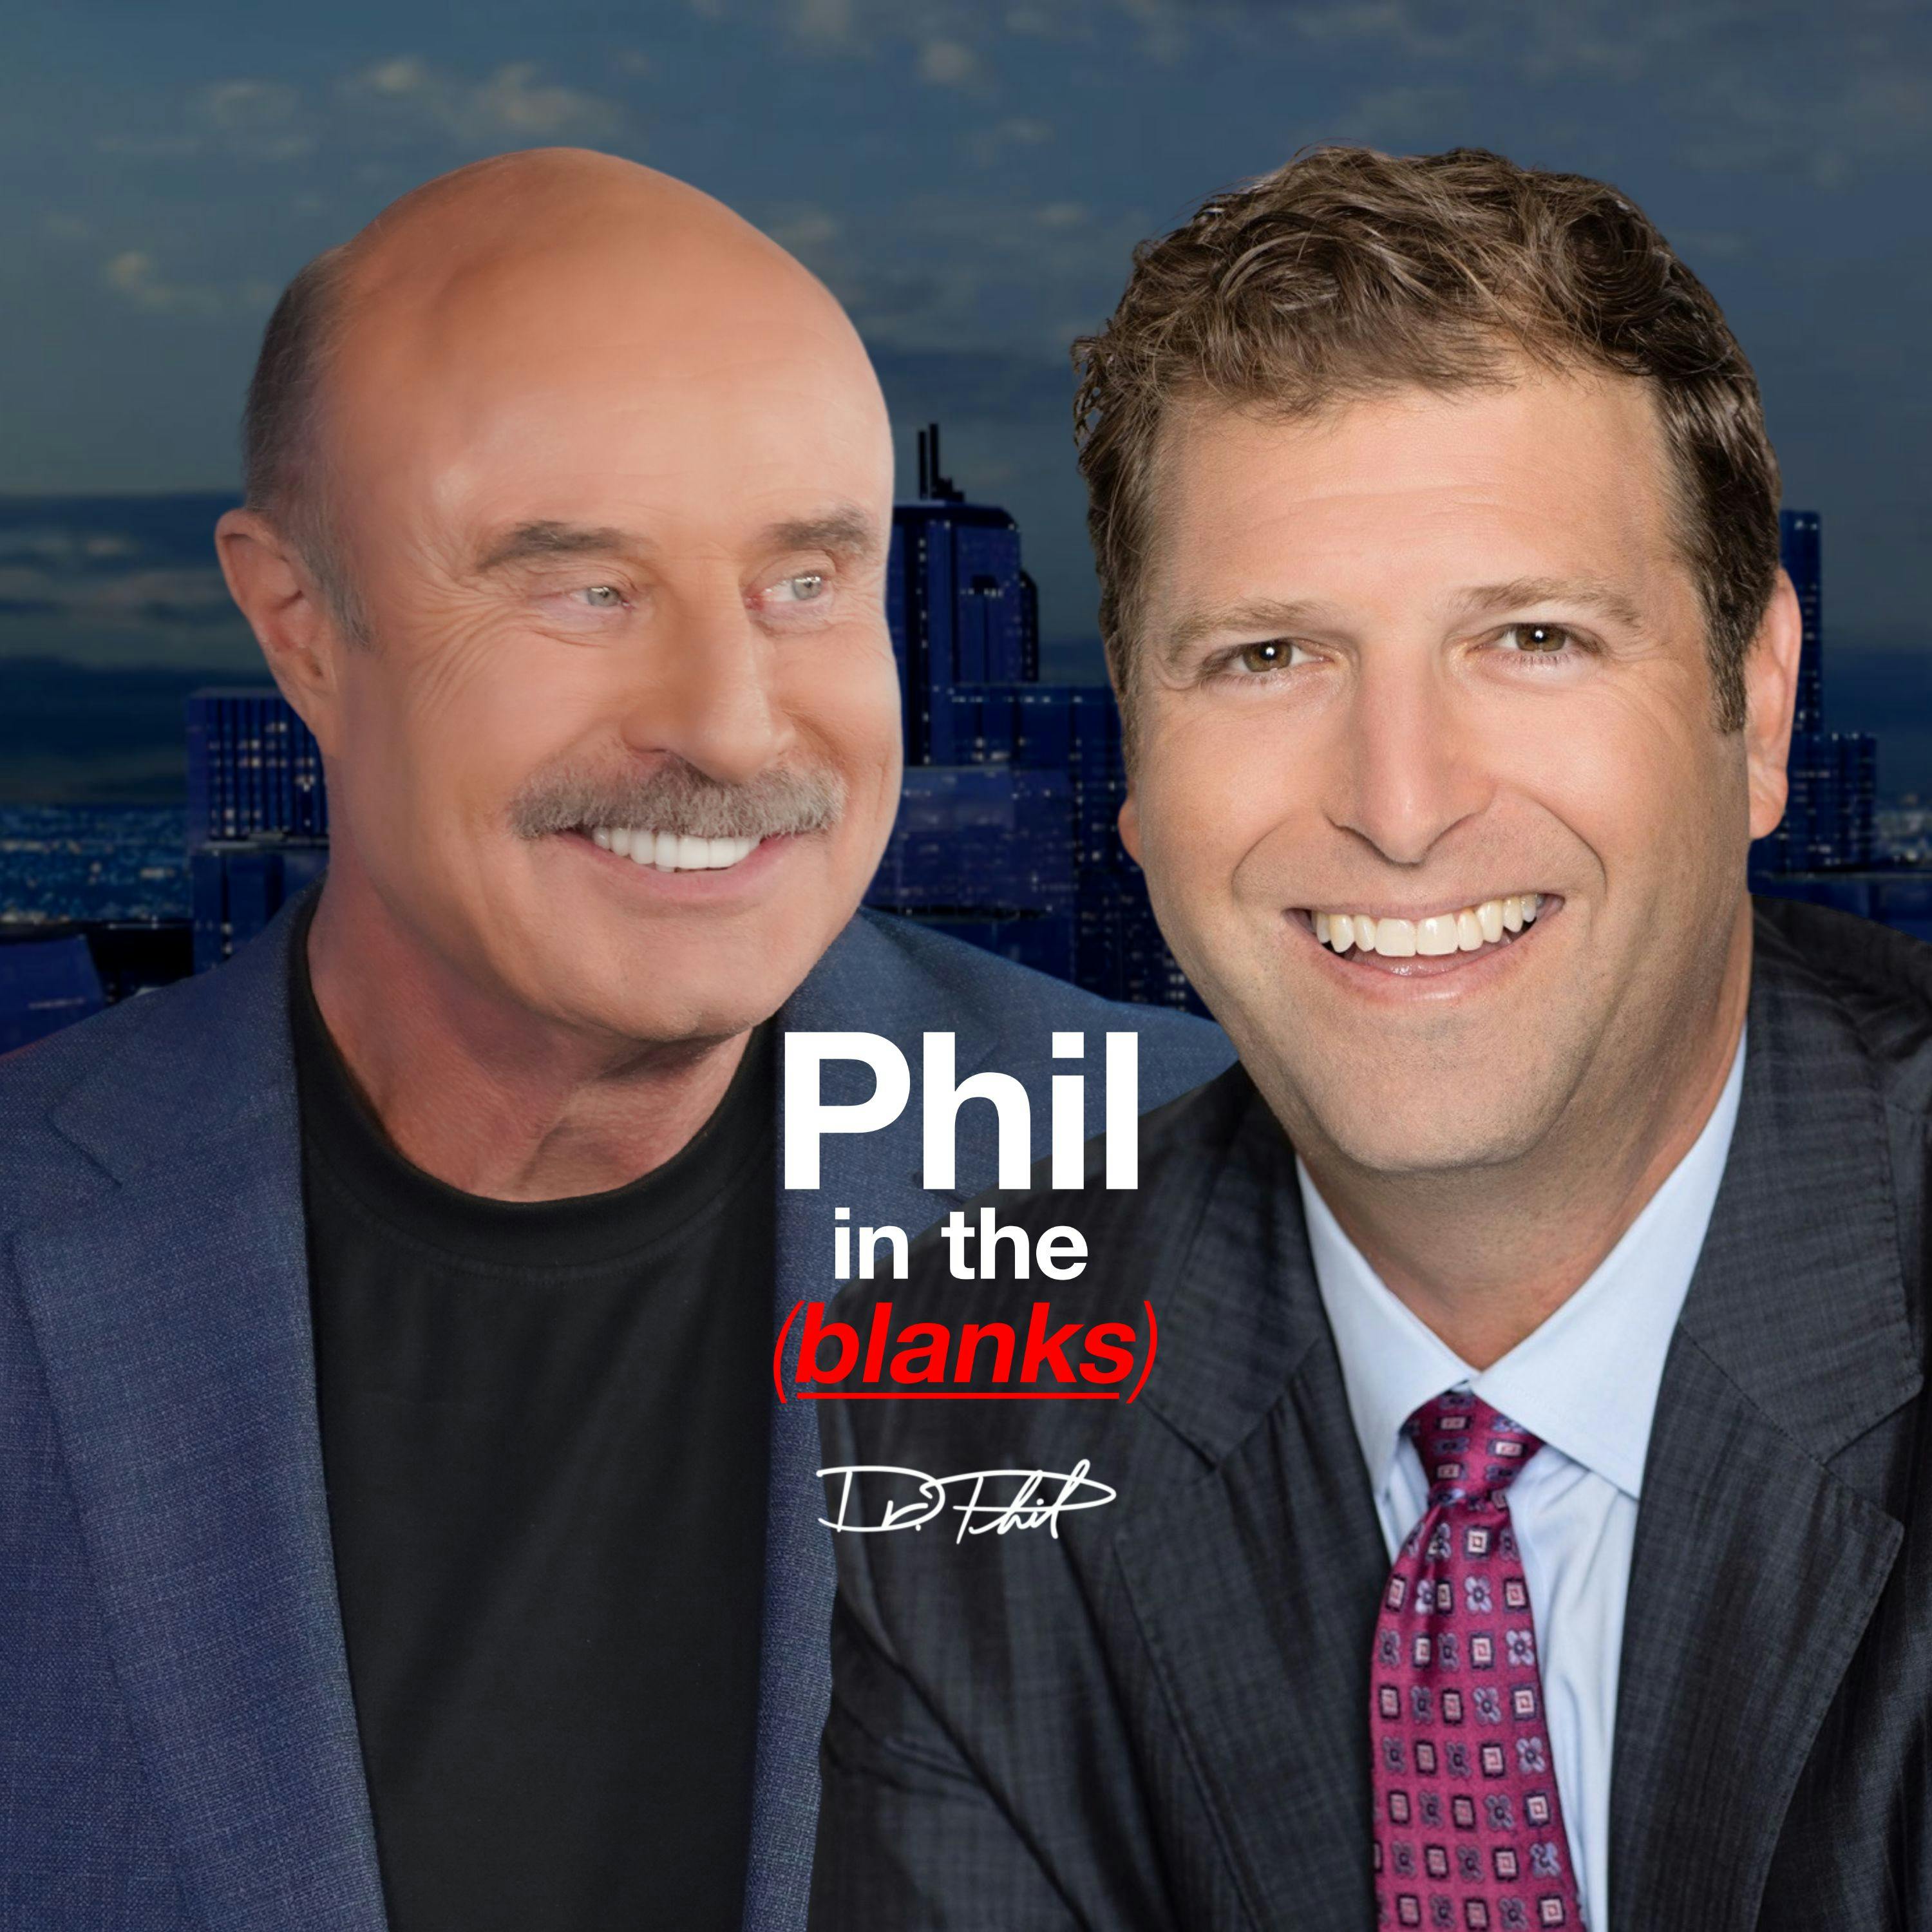 Dr. Phil Exclusive: Eric Lynn's Expertise on Iron Dome, Fighter Jets and Iran's Attack on Israel